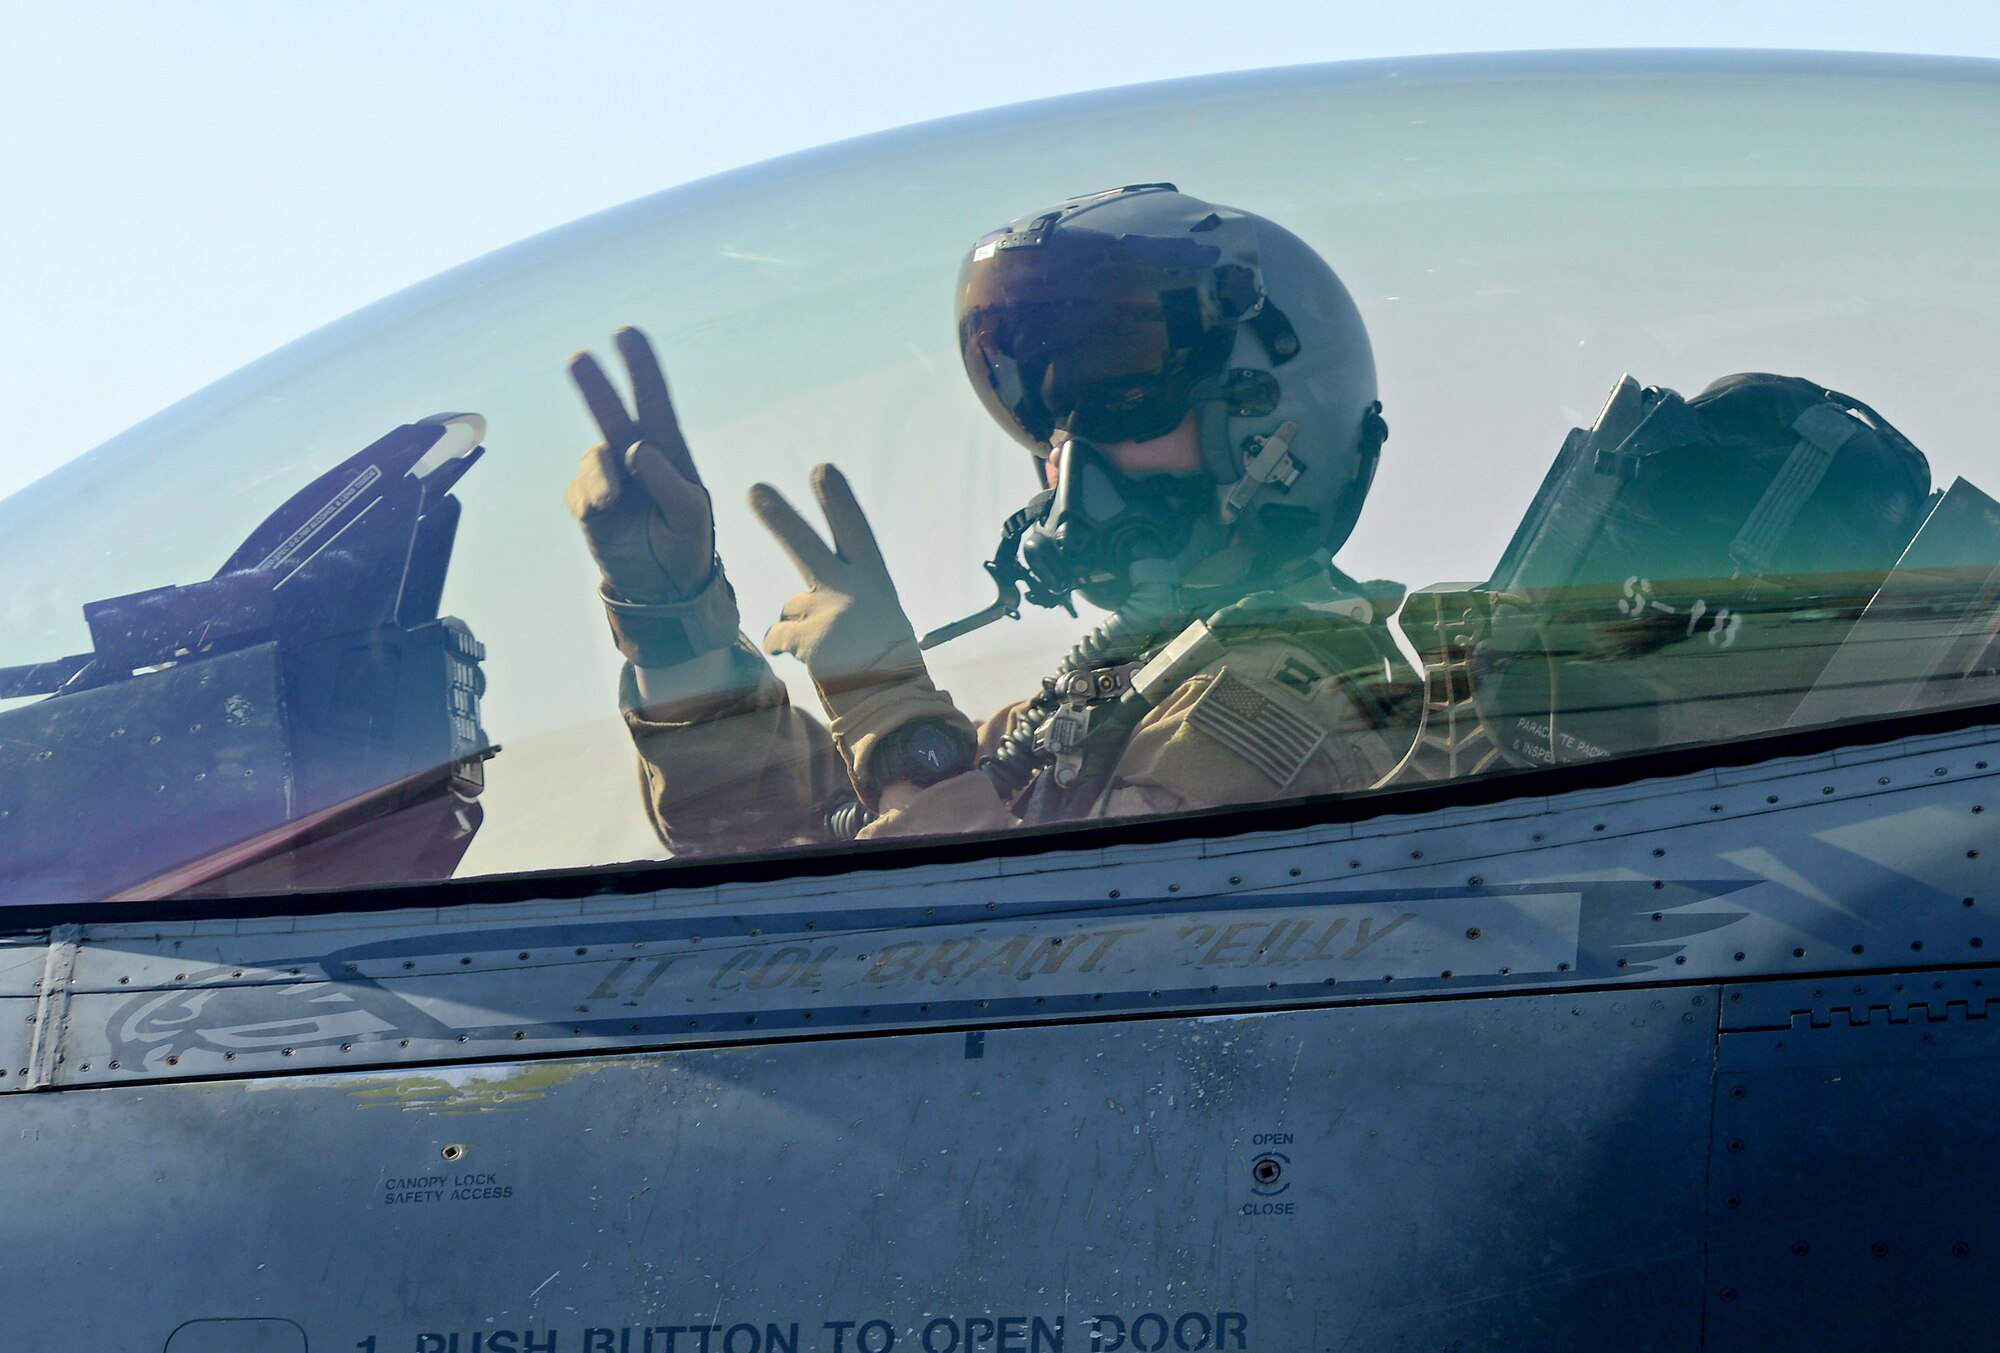 “Slapshot”, 77th Expeditionary Fighter Squadron F-16 Fighting Falcon fighter pilot, signals from his aircraft prior to taking off Feb. 9, 2018 at Bagram Airfield, Afghanistan.